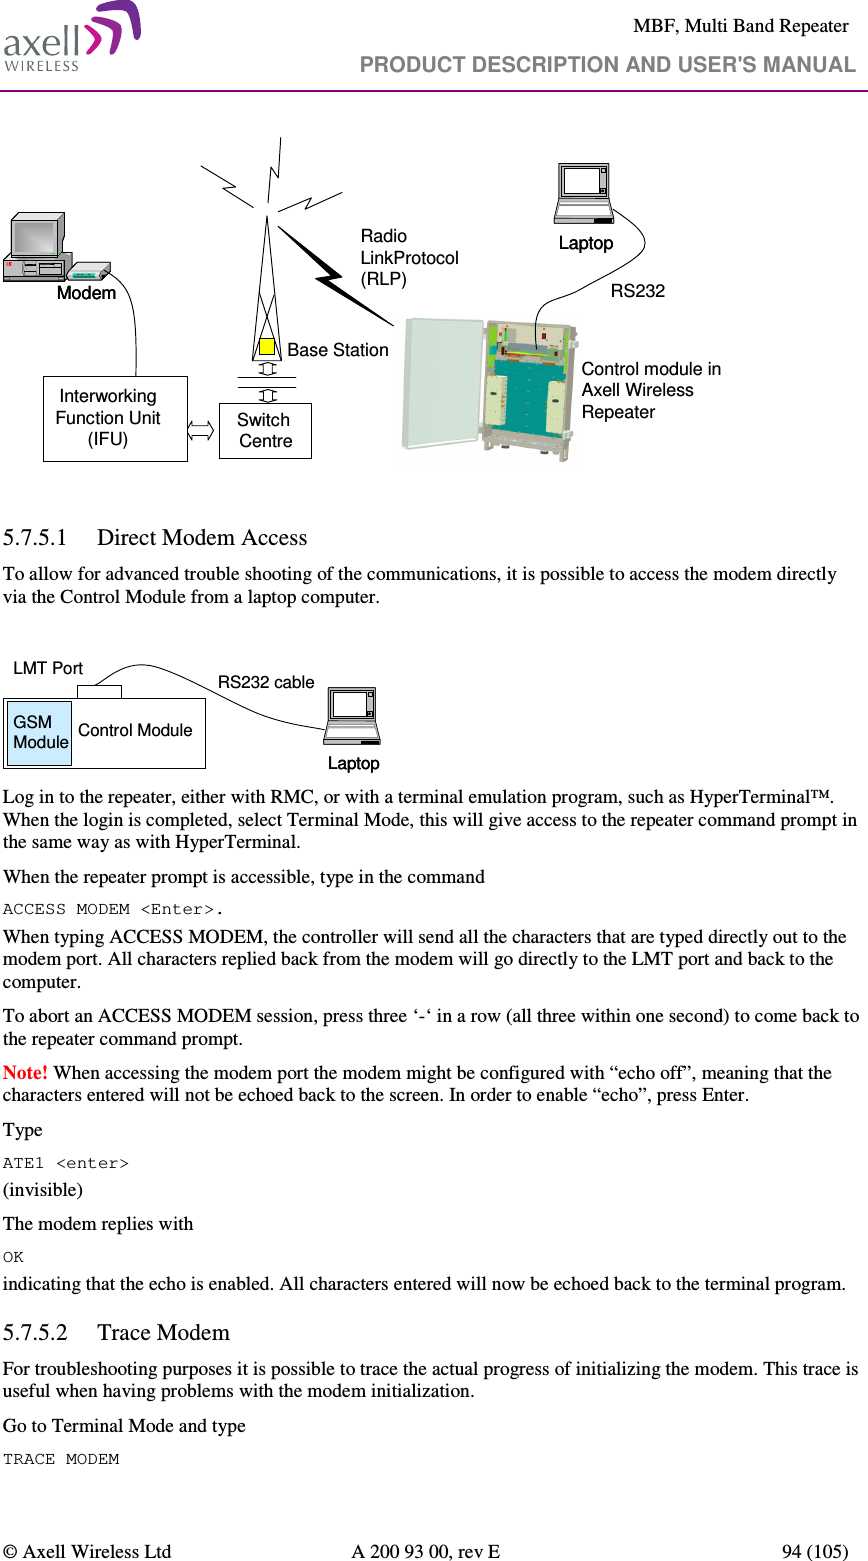     MBF, Multi Band Repeater                                     PRODUCT DESCRIPTION AND USER&apos;S MANUAL   © Axell Wireless Ltd  A 200 93 00, rev E  94 (105)  Radio LinkProtocol(RLP)Base StationLaptopLaptopControl module in Axell Wireless  RepeaterSwitch CentreModemModem RS232InterworkingFunction Unit(IFU)  5.7.5.1 Direct Modem Access To allow for advanced trouble shooting of the communications, it is possible to access the modem directly via the Control Module from a laptop computer.   LaptopLaptopRS232 cableControl ModuleGSM ModuleLMT Port Log in to the repeater, either with RMC, or with a terminal emulation program, such as HyperTerminal™. When the login is completed, select Terminal Mode, this will give access to the repeater command prompt in the same way as with HyperTerminal. When the repeater prompt is accessible, type in the command  ACCESS MODEM &lt;Enter&gt;.  When typing ACCESS MODEM, the controller will send all the characters that are typed directly out to the modem port. All characters replied back from the modem will go directly to the LMT port and back to the computer. To abort an ACCESS MODEM session, press three ‘-‘ in a row (all three within one second) to come back to the repeater command prompt. Note! When accessing the modem port the modem might be configured with “echo off”, meaning that the characters entered will not be echoed back to the screen. In order to enable “echo”, press Enter.  Type  ATE1 &lt;enter&gt; (invisible)  The modem replies with OK indicating that the echo is enabled. All characters entered will now be echoed back to the terminal program. 5.7.5.2 Trace Modem For troubleshooting purposes it is possible to trace the actual progress of initializing the modem. This trace is useful when having problems with the modem initialization. Go to Terminal Mode and type TRACE MODEM  